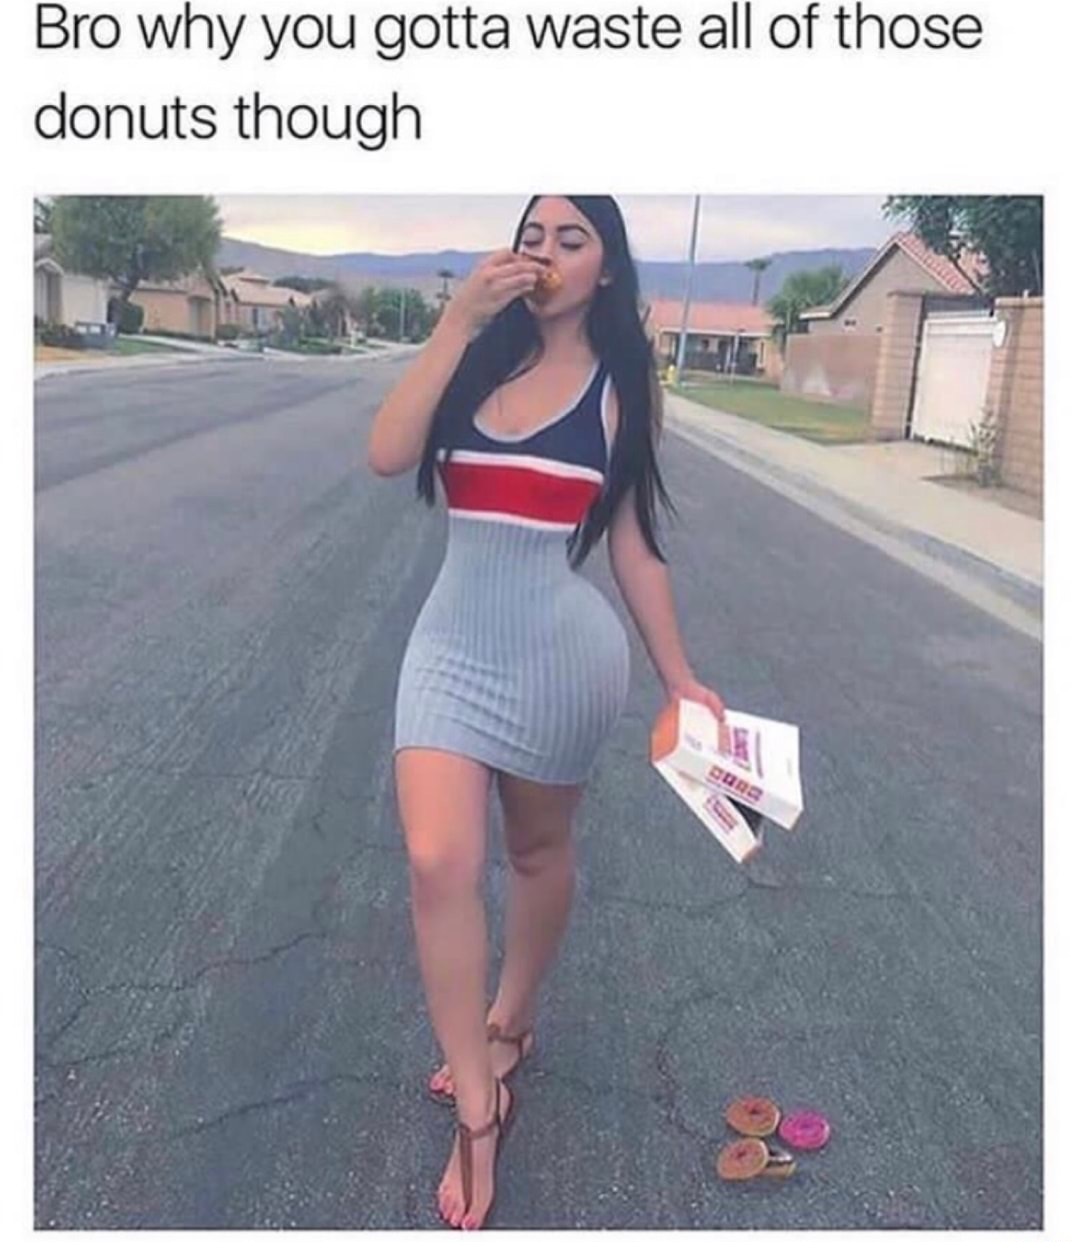 donuts are bad for you - Bro why you gotta waste all of those donuts though